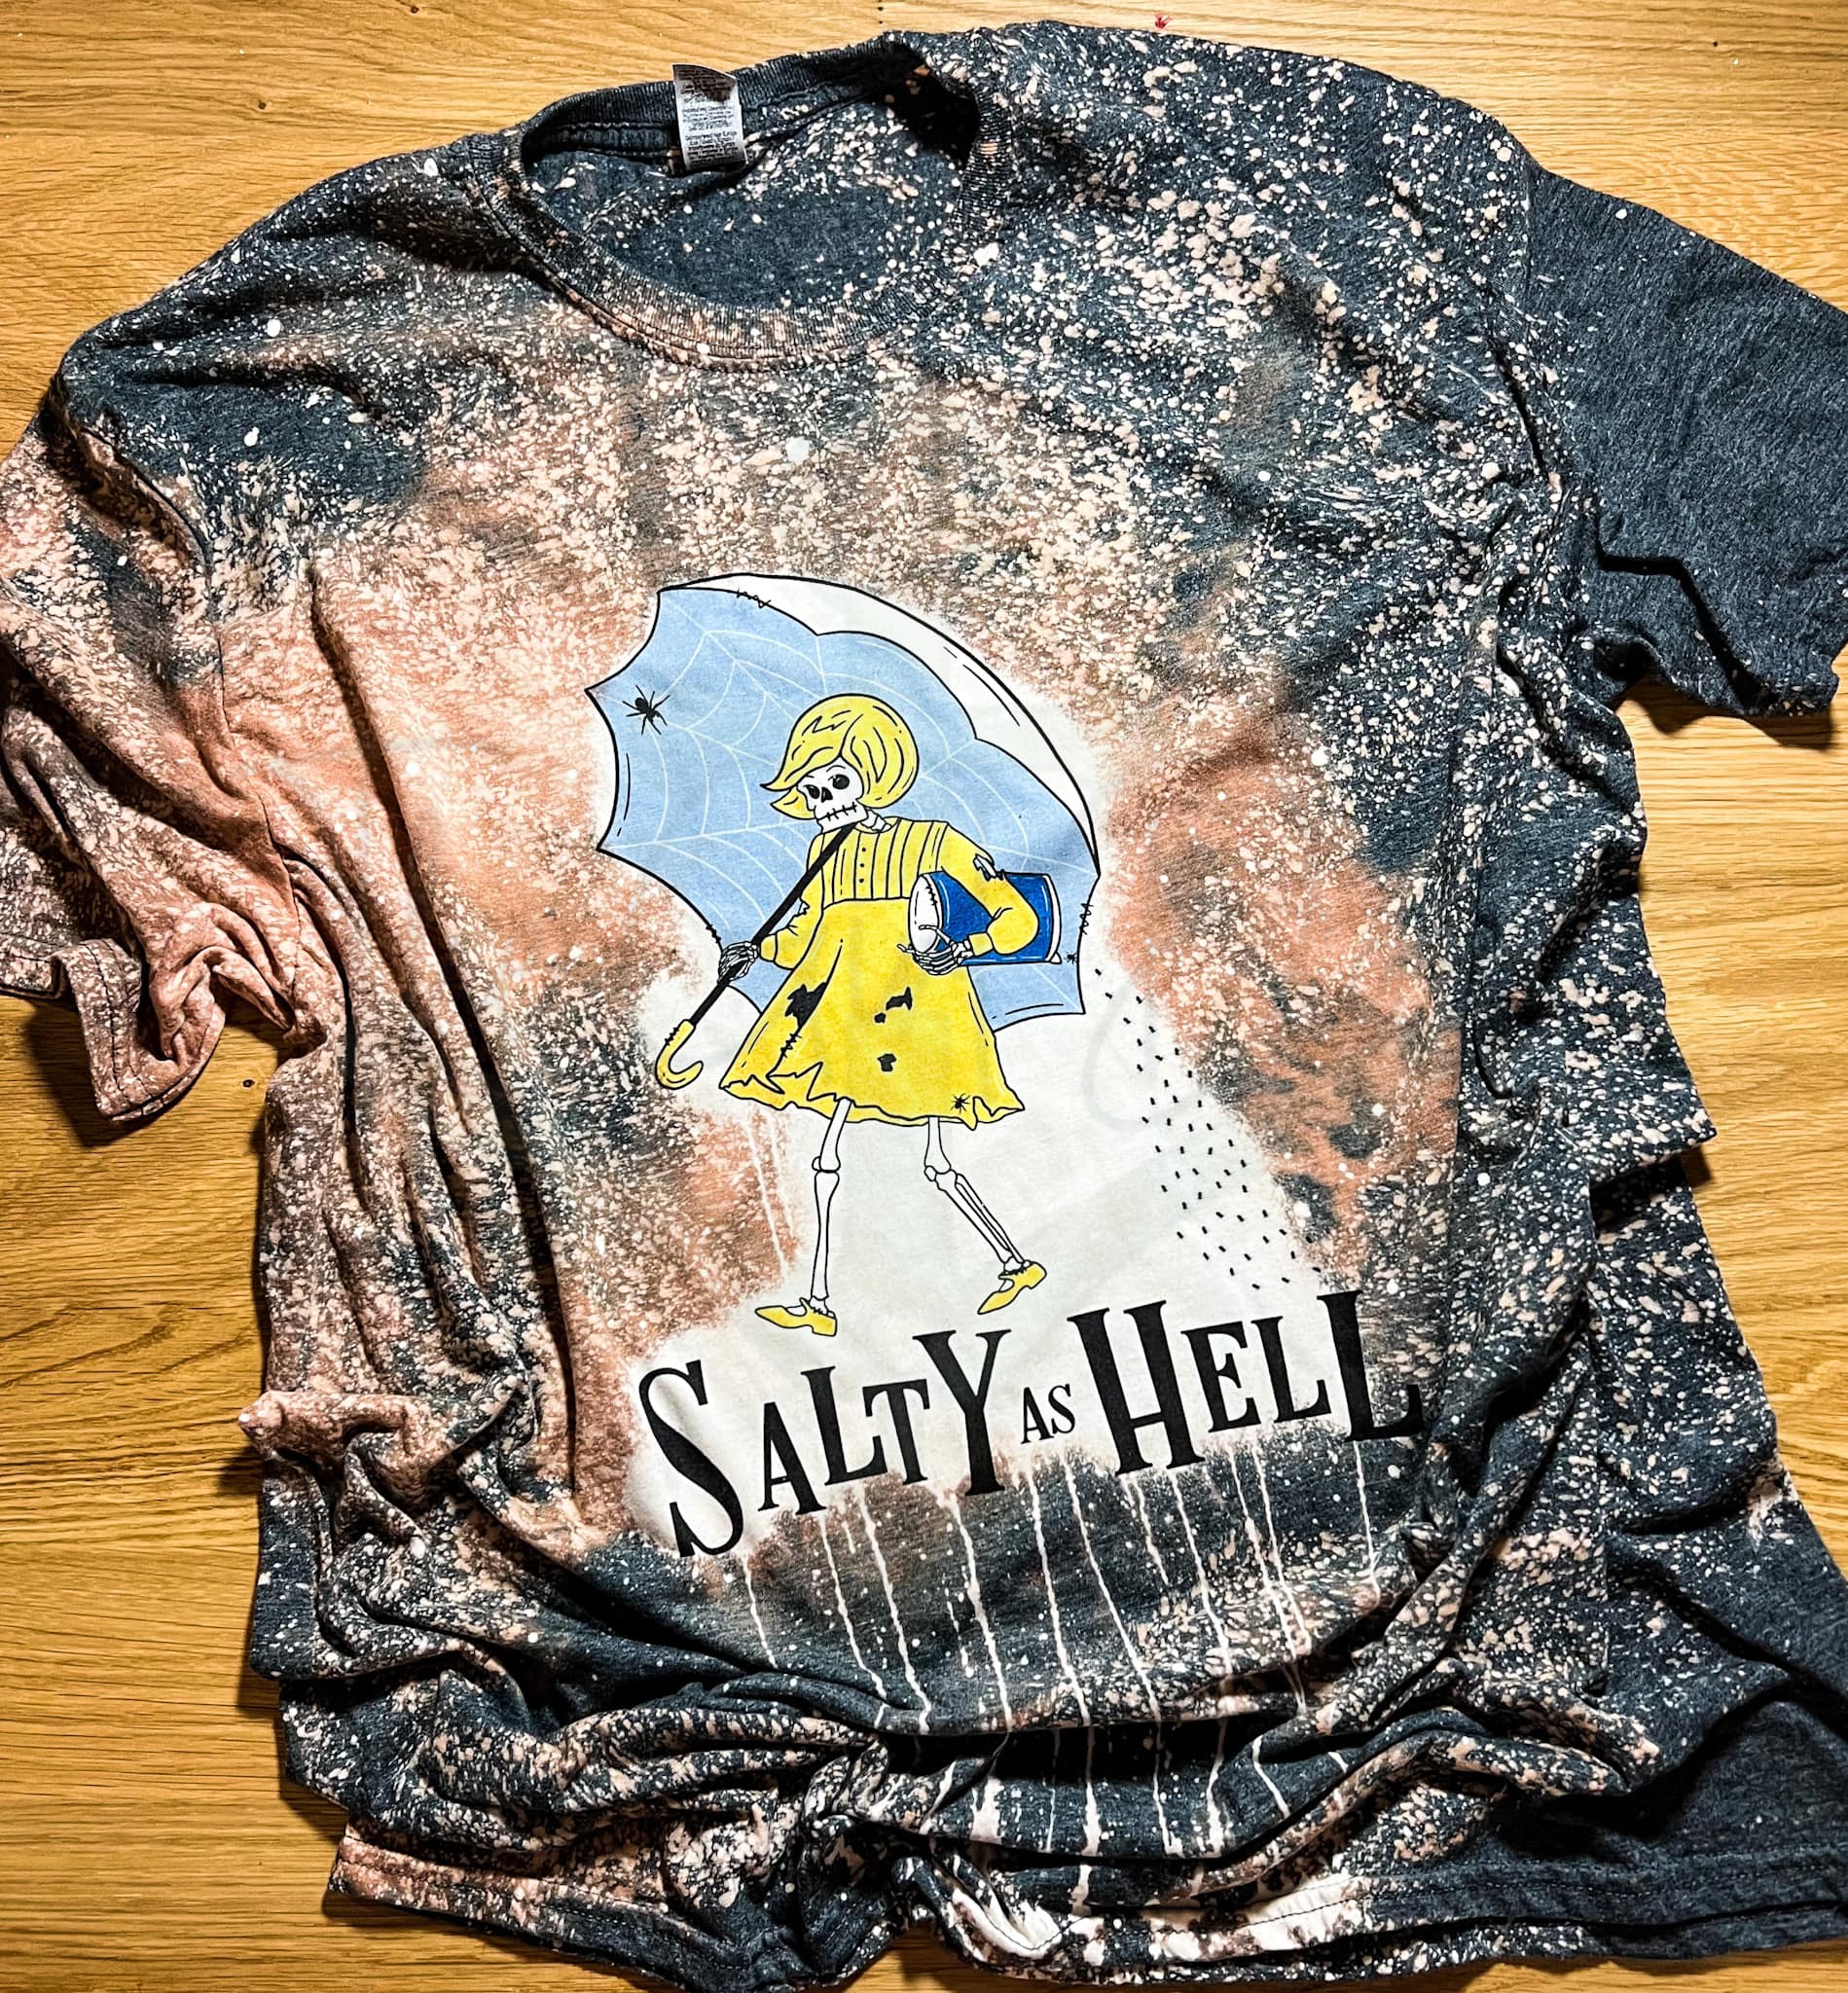 Salty as Hell Top Design